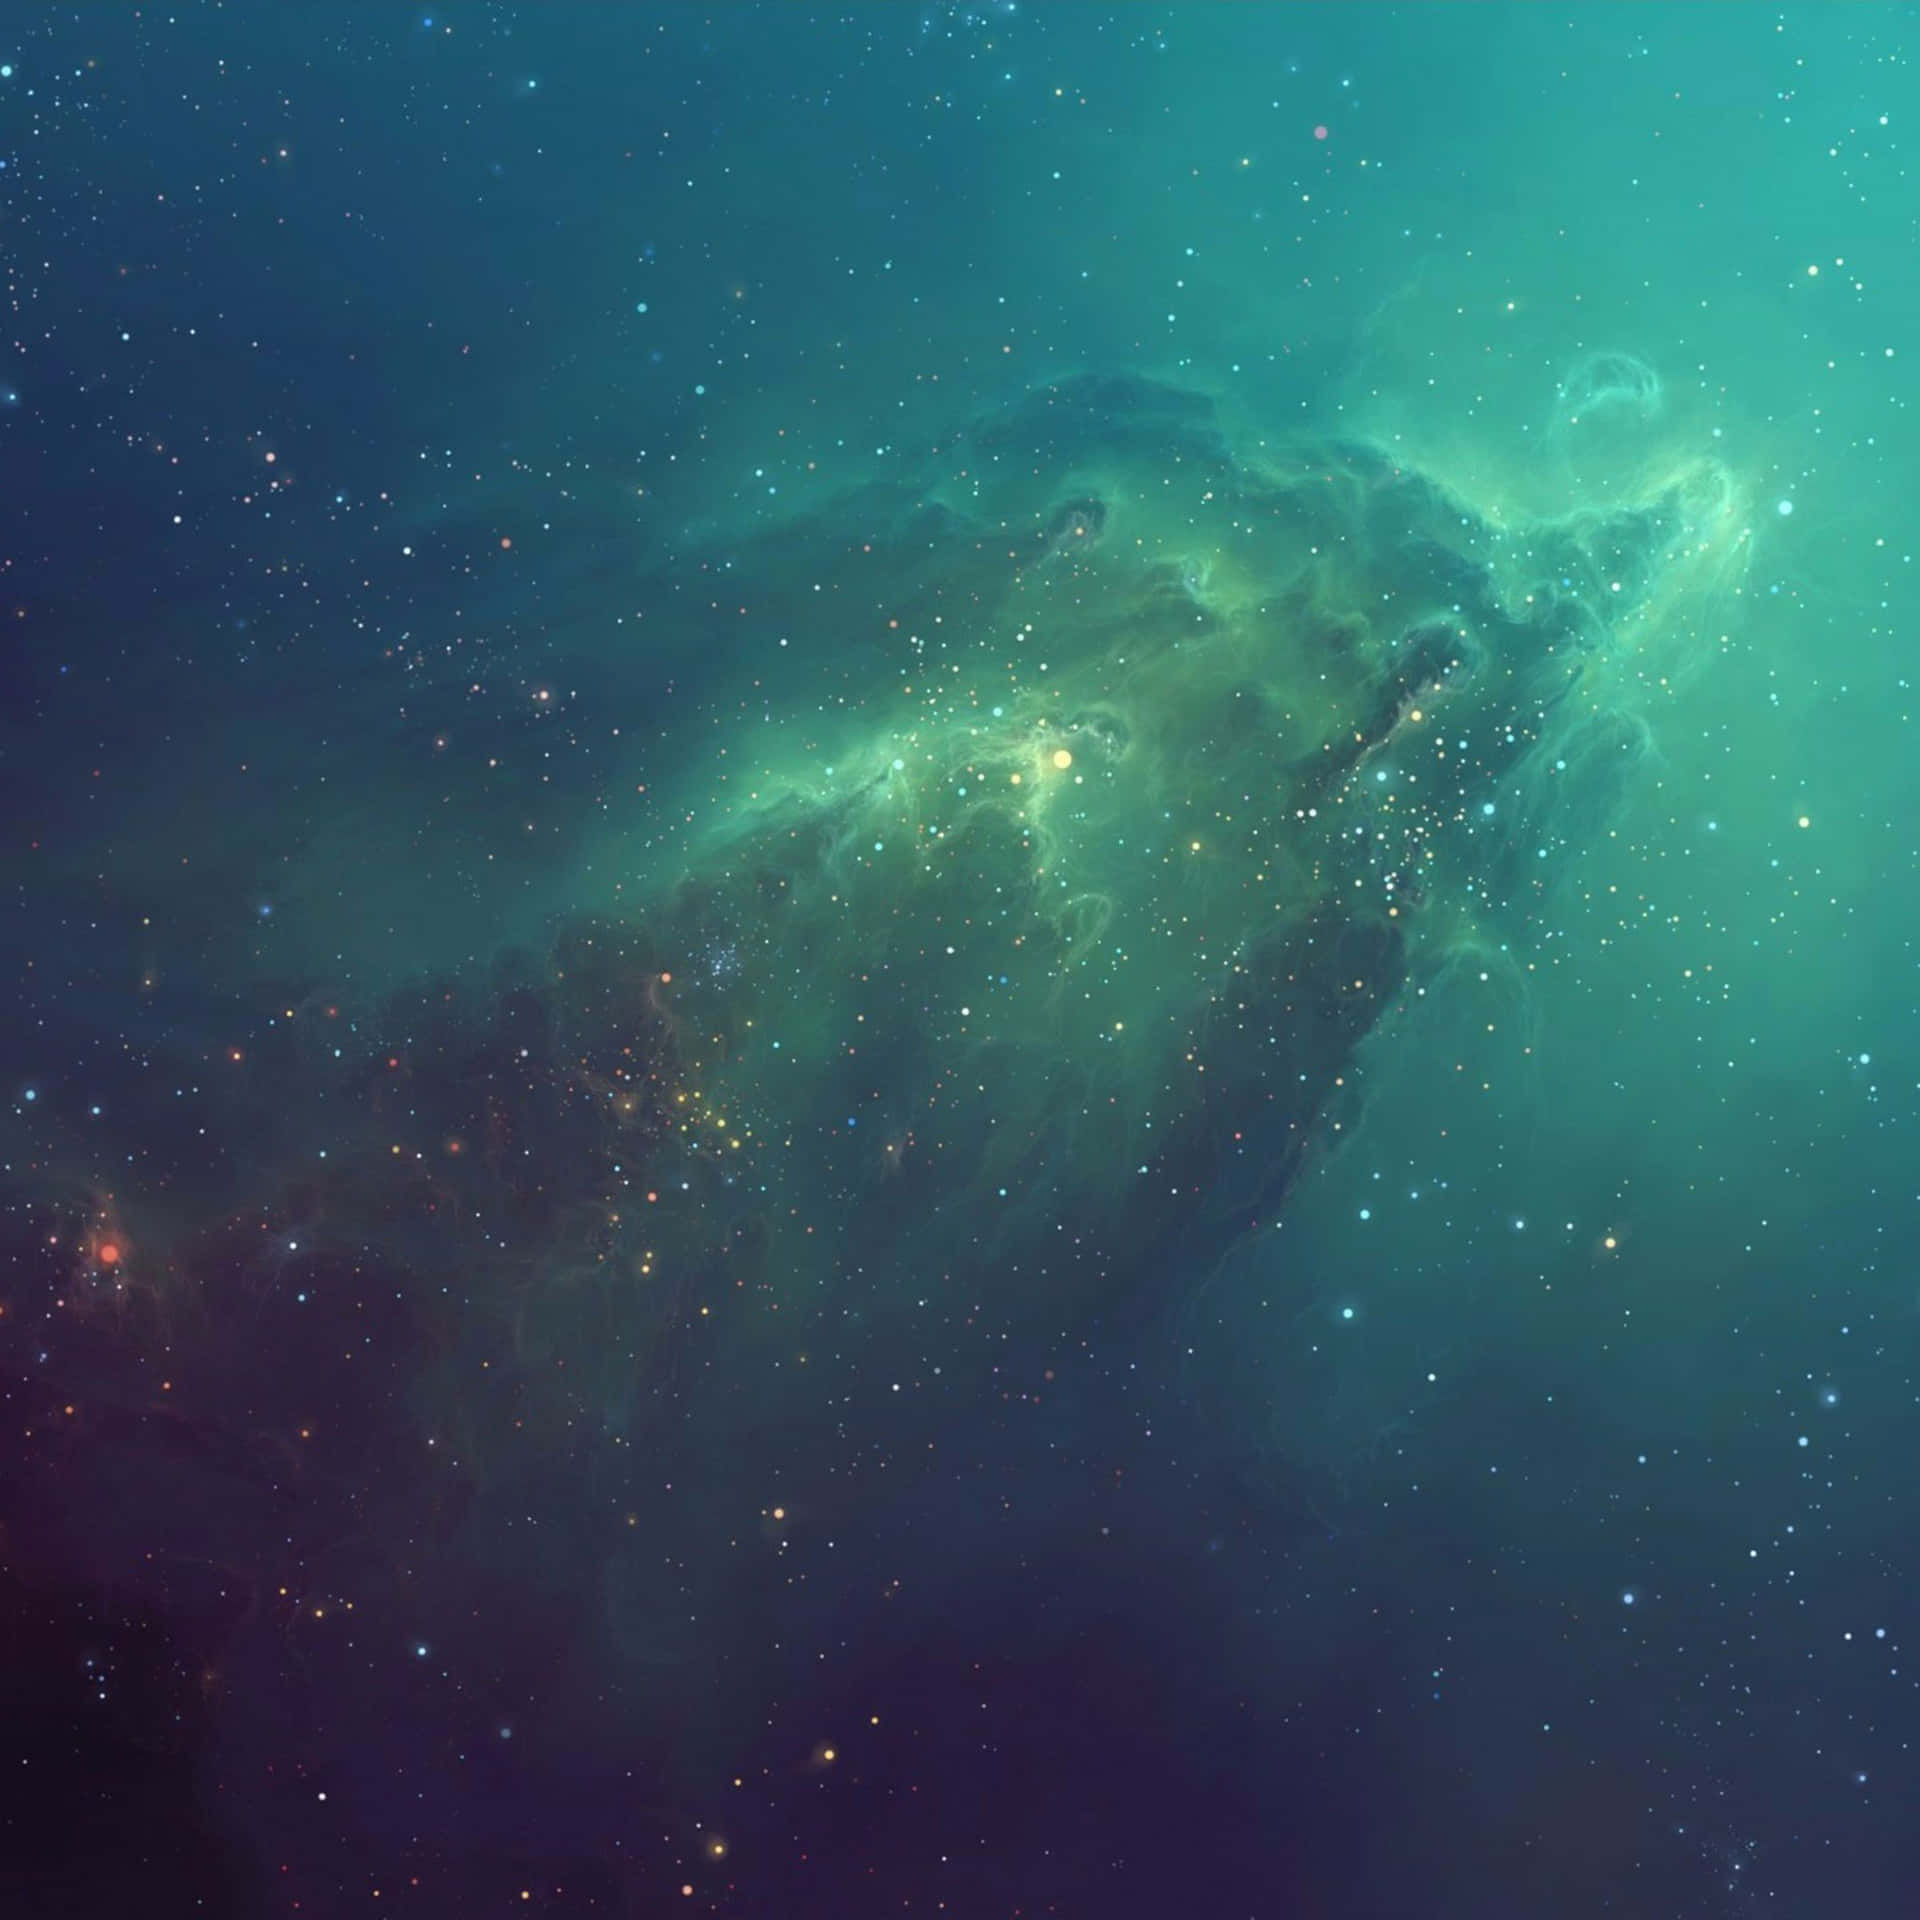 Unlock the full potential of your Ipad with this astronomic view of the universe. Wallpaper